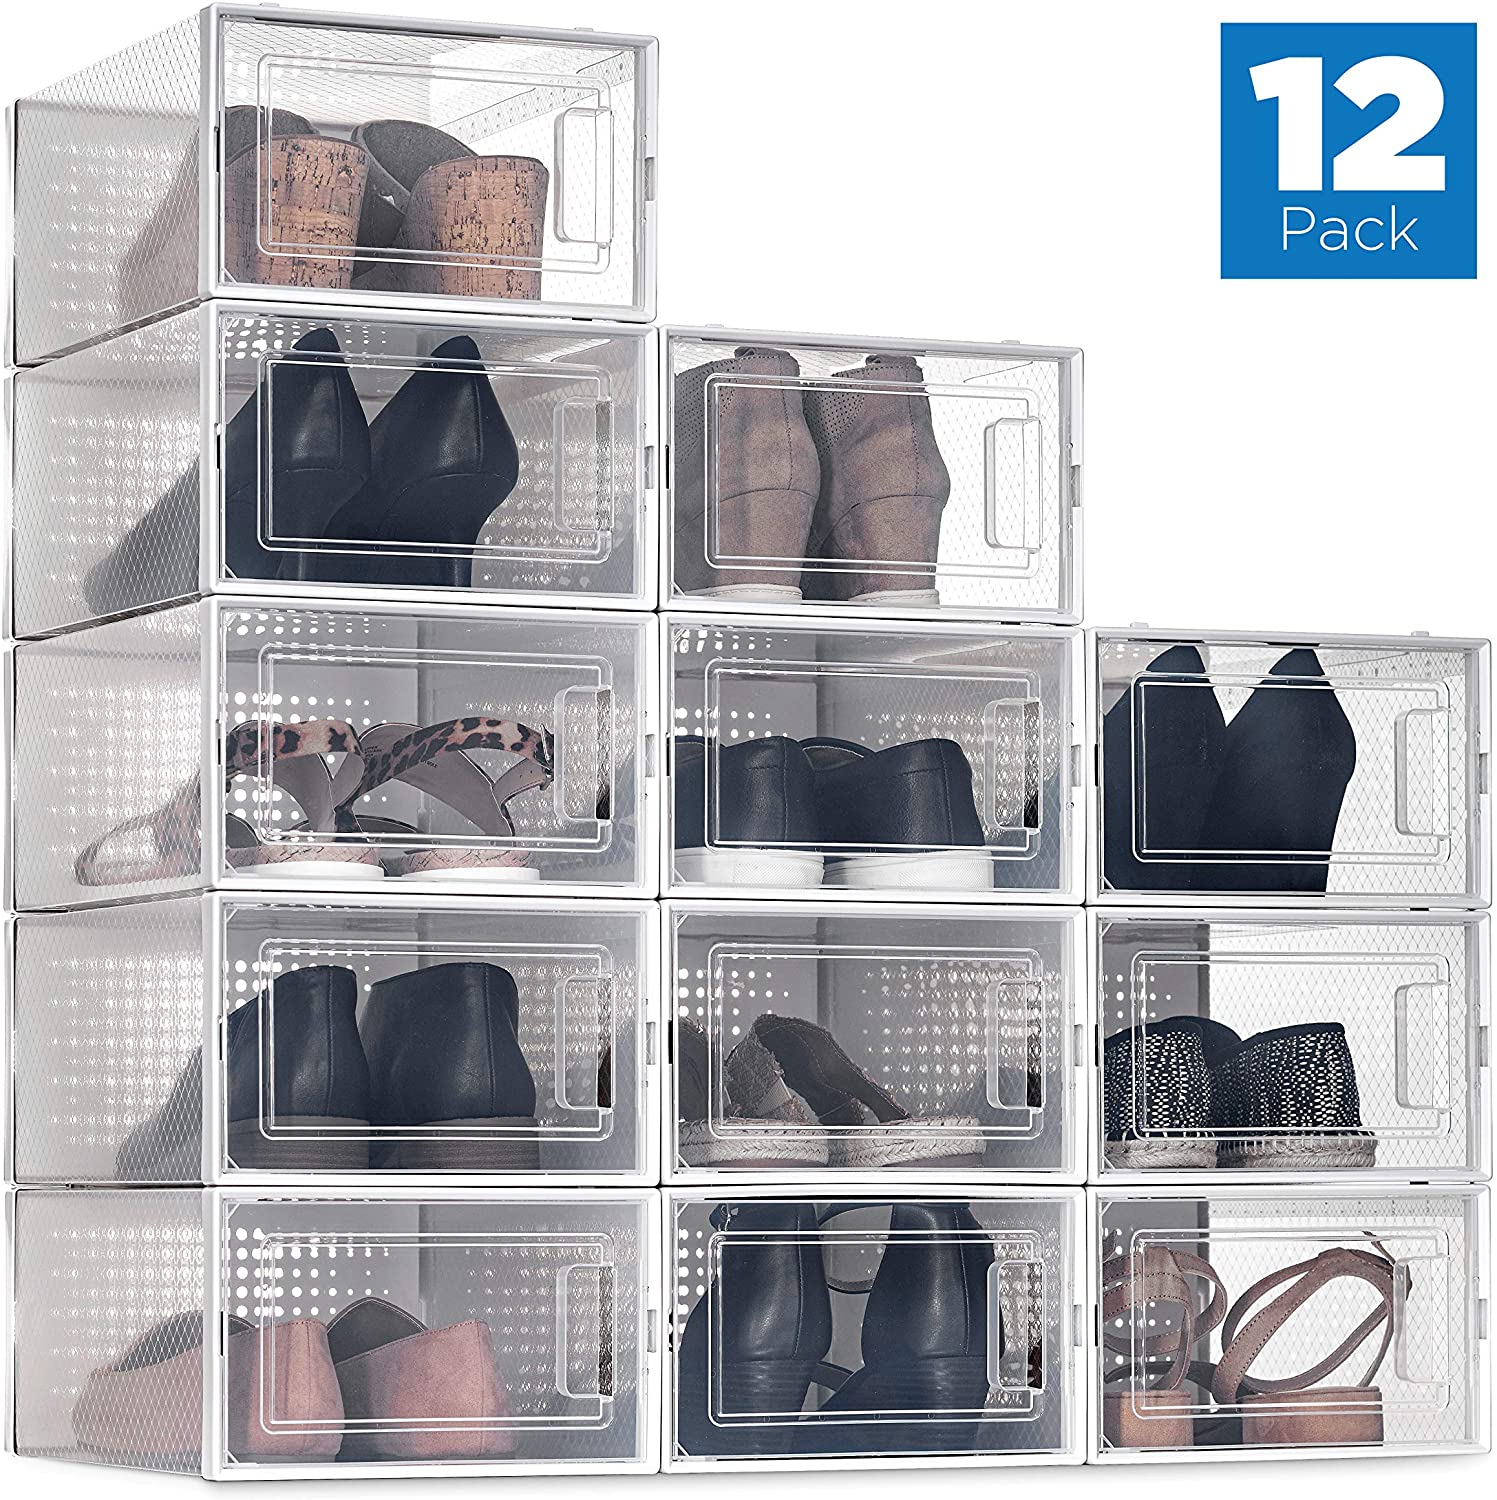 Shoe Organizer for Closet Space Saving Shoe Sneaker Containers Bins Holder Clear Plastic Stackable Shoe Boxes Black TUKKU 12 Pack Shoe Storage Boxes